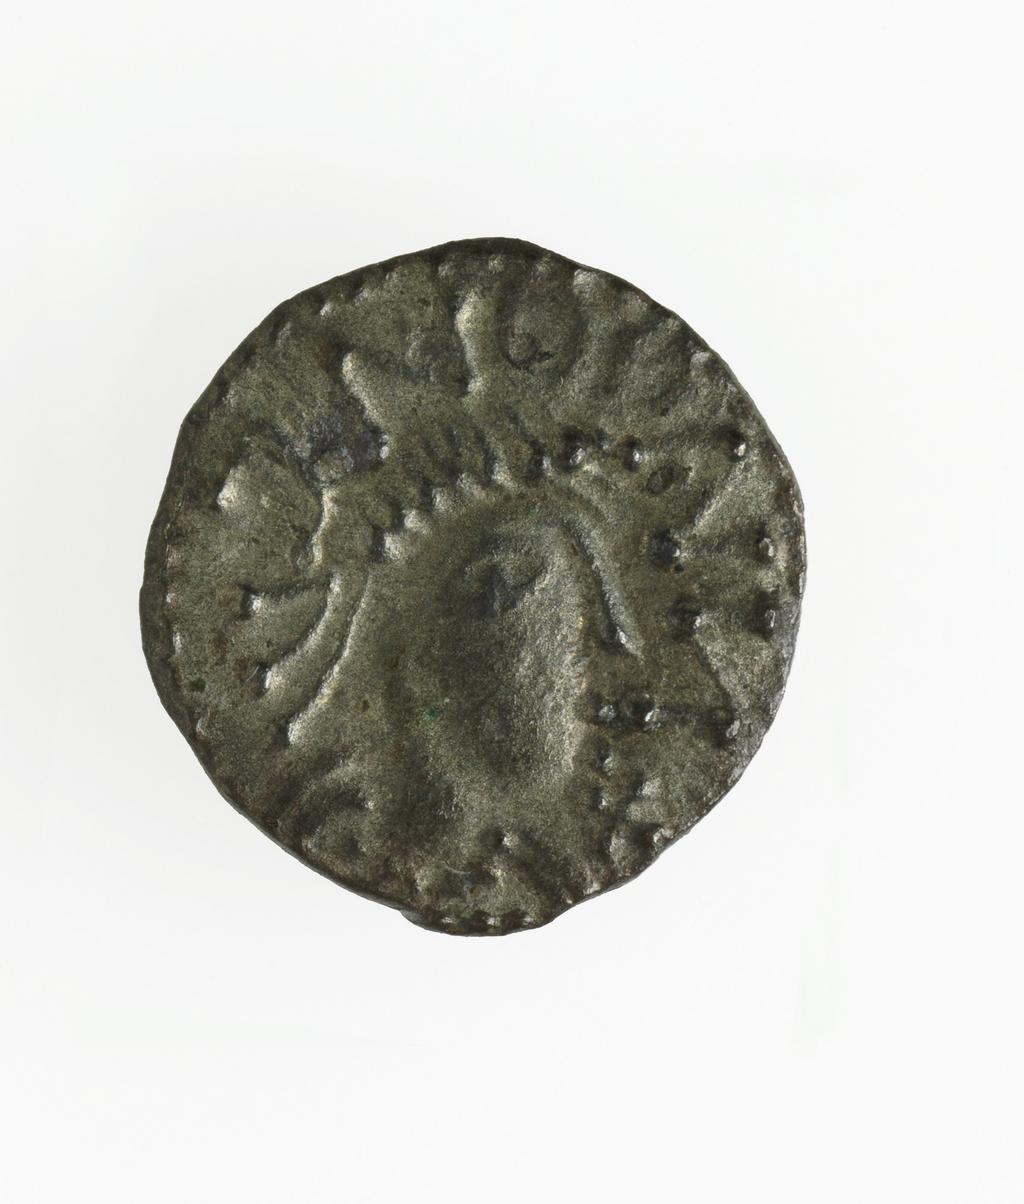 An image of Coinage. Penny. Series L, Type 12. Silver, struck (metalworking), weight 1.04 g, die axis 270 degrees, width 11.79 mm, height 12.38 mm, 730-750 AD. English. Early Medieval. Anglo-Saxon. Production Note: Same reverse die as BM 1983-1024-1. Alternative Number(s): De Wit 244. De Wit 3991.